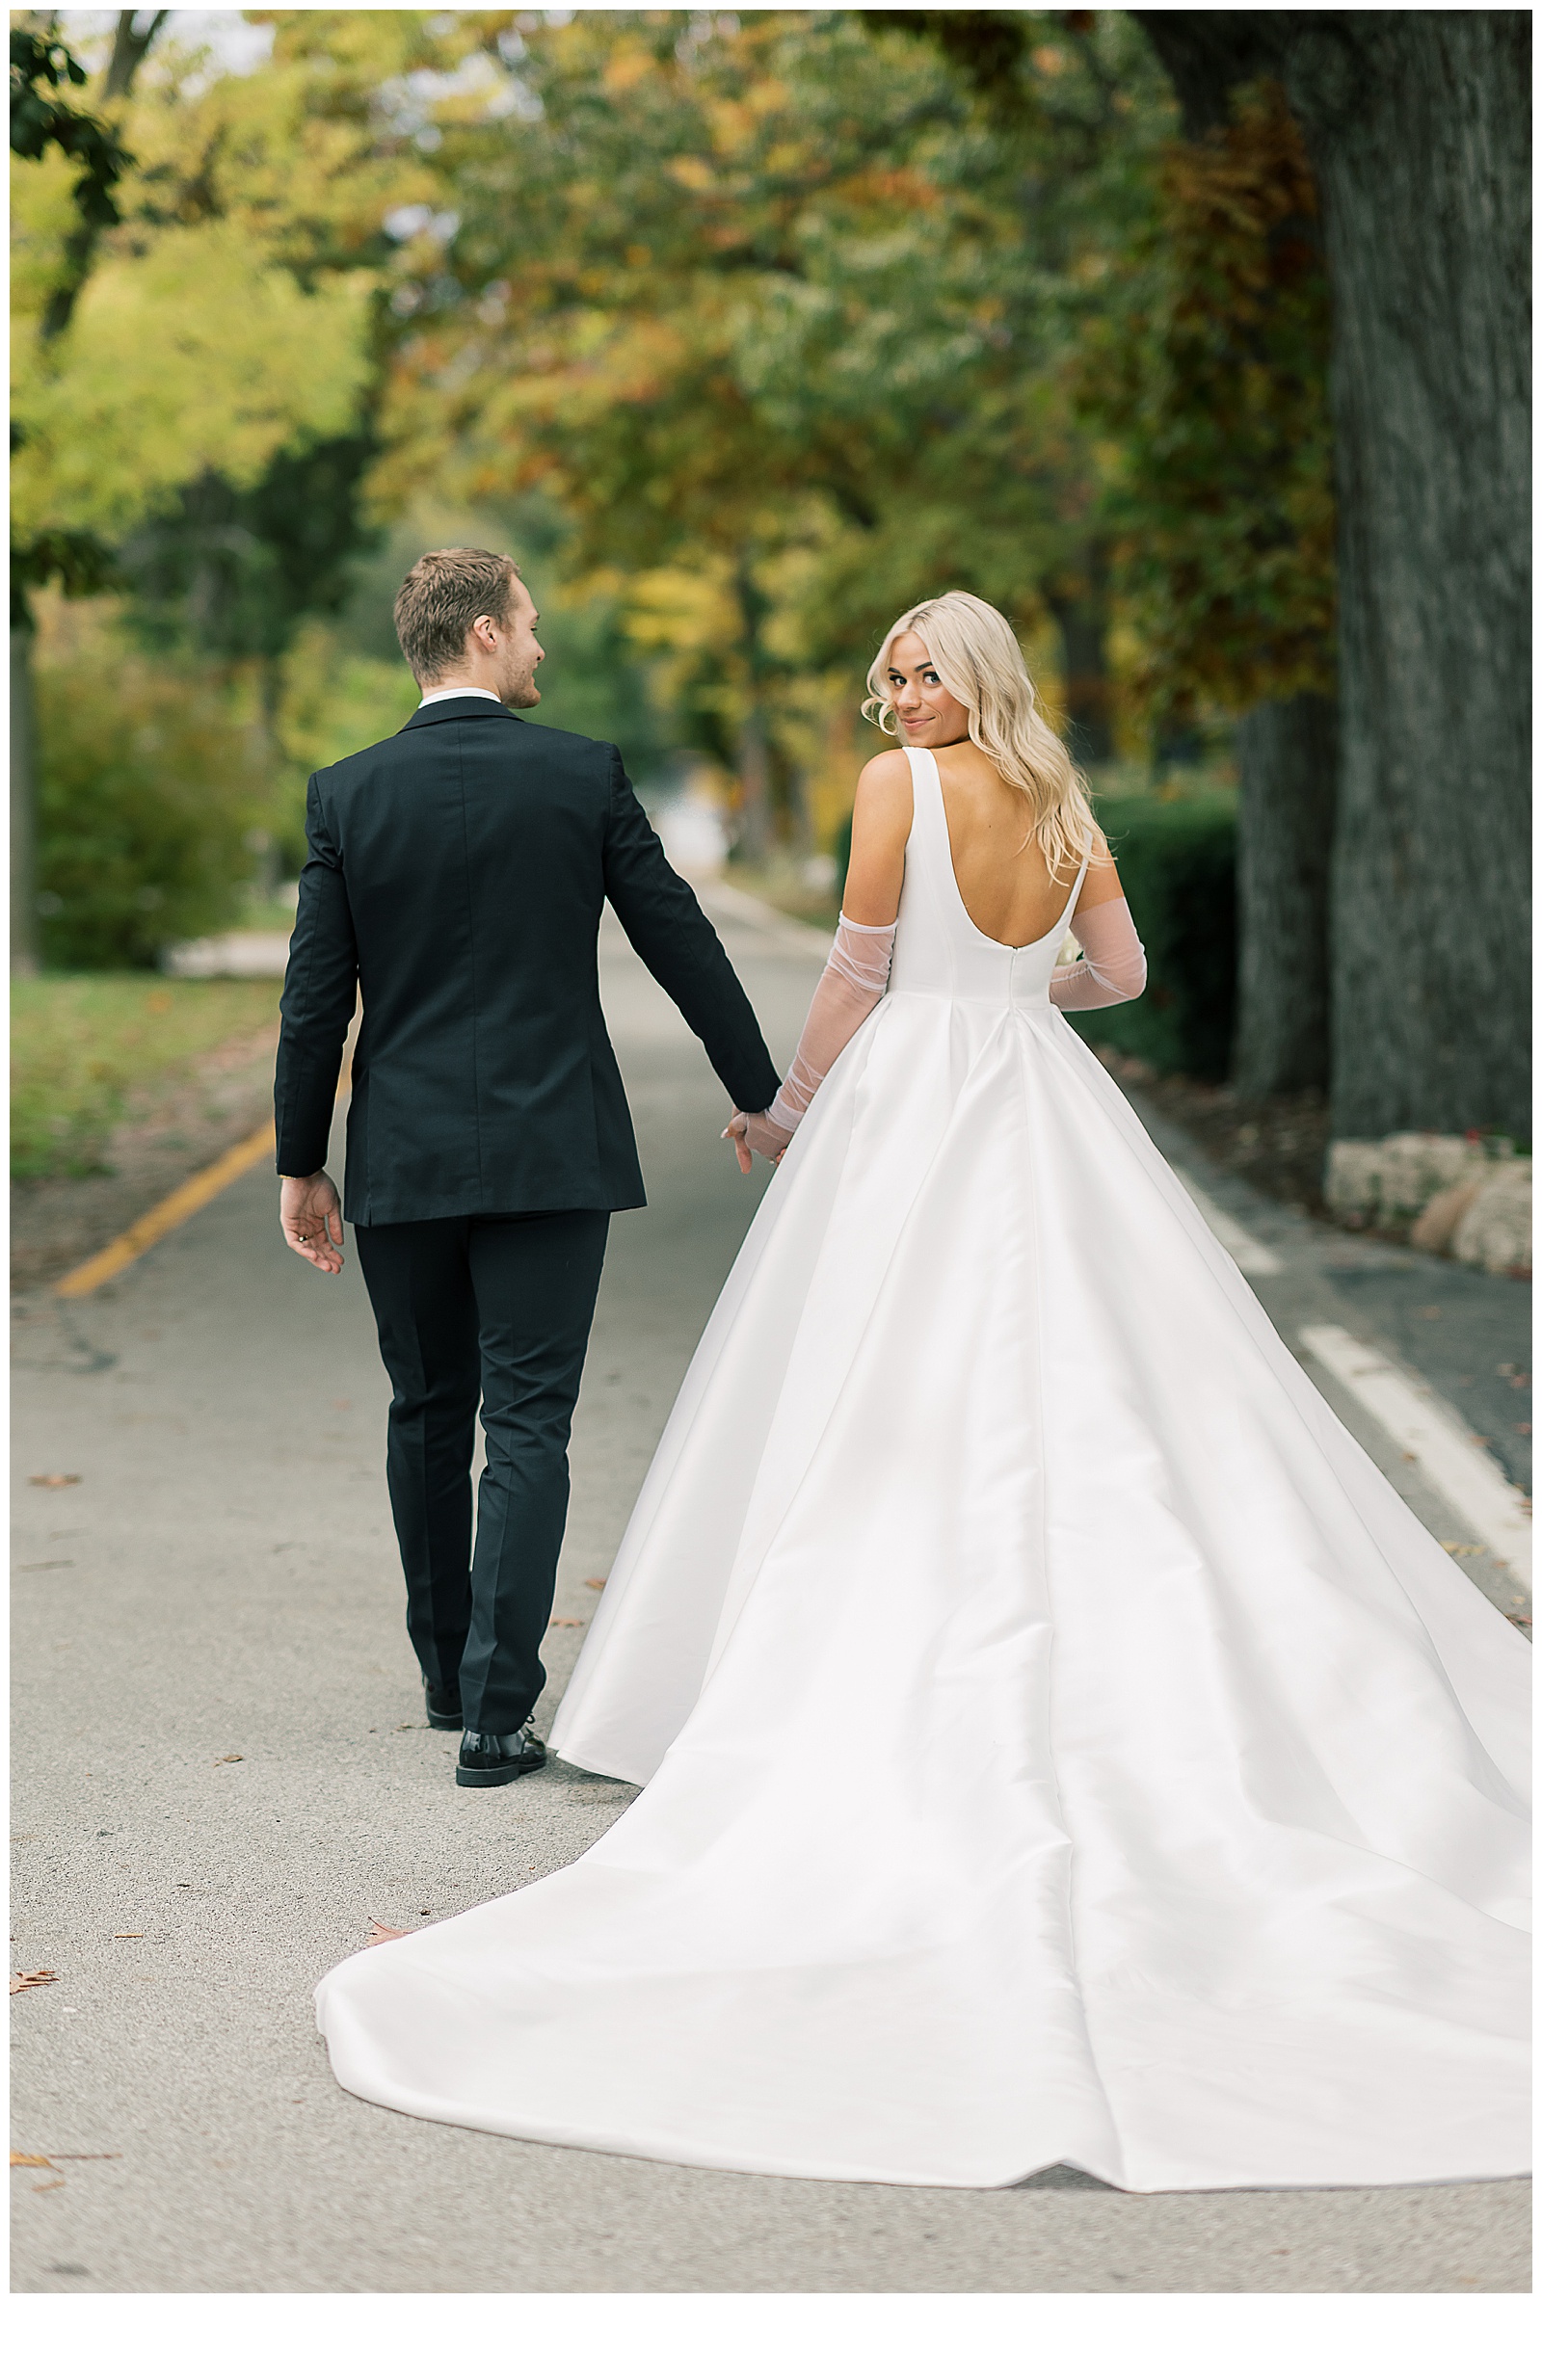 A bride and groom walk hand in hand with their backs turned down a narrow, empty street surrounded by a canopy of green leafy trees.  The bride looks back toward the camera with a soft smile.